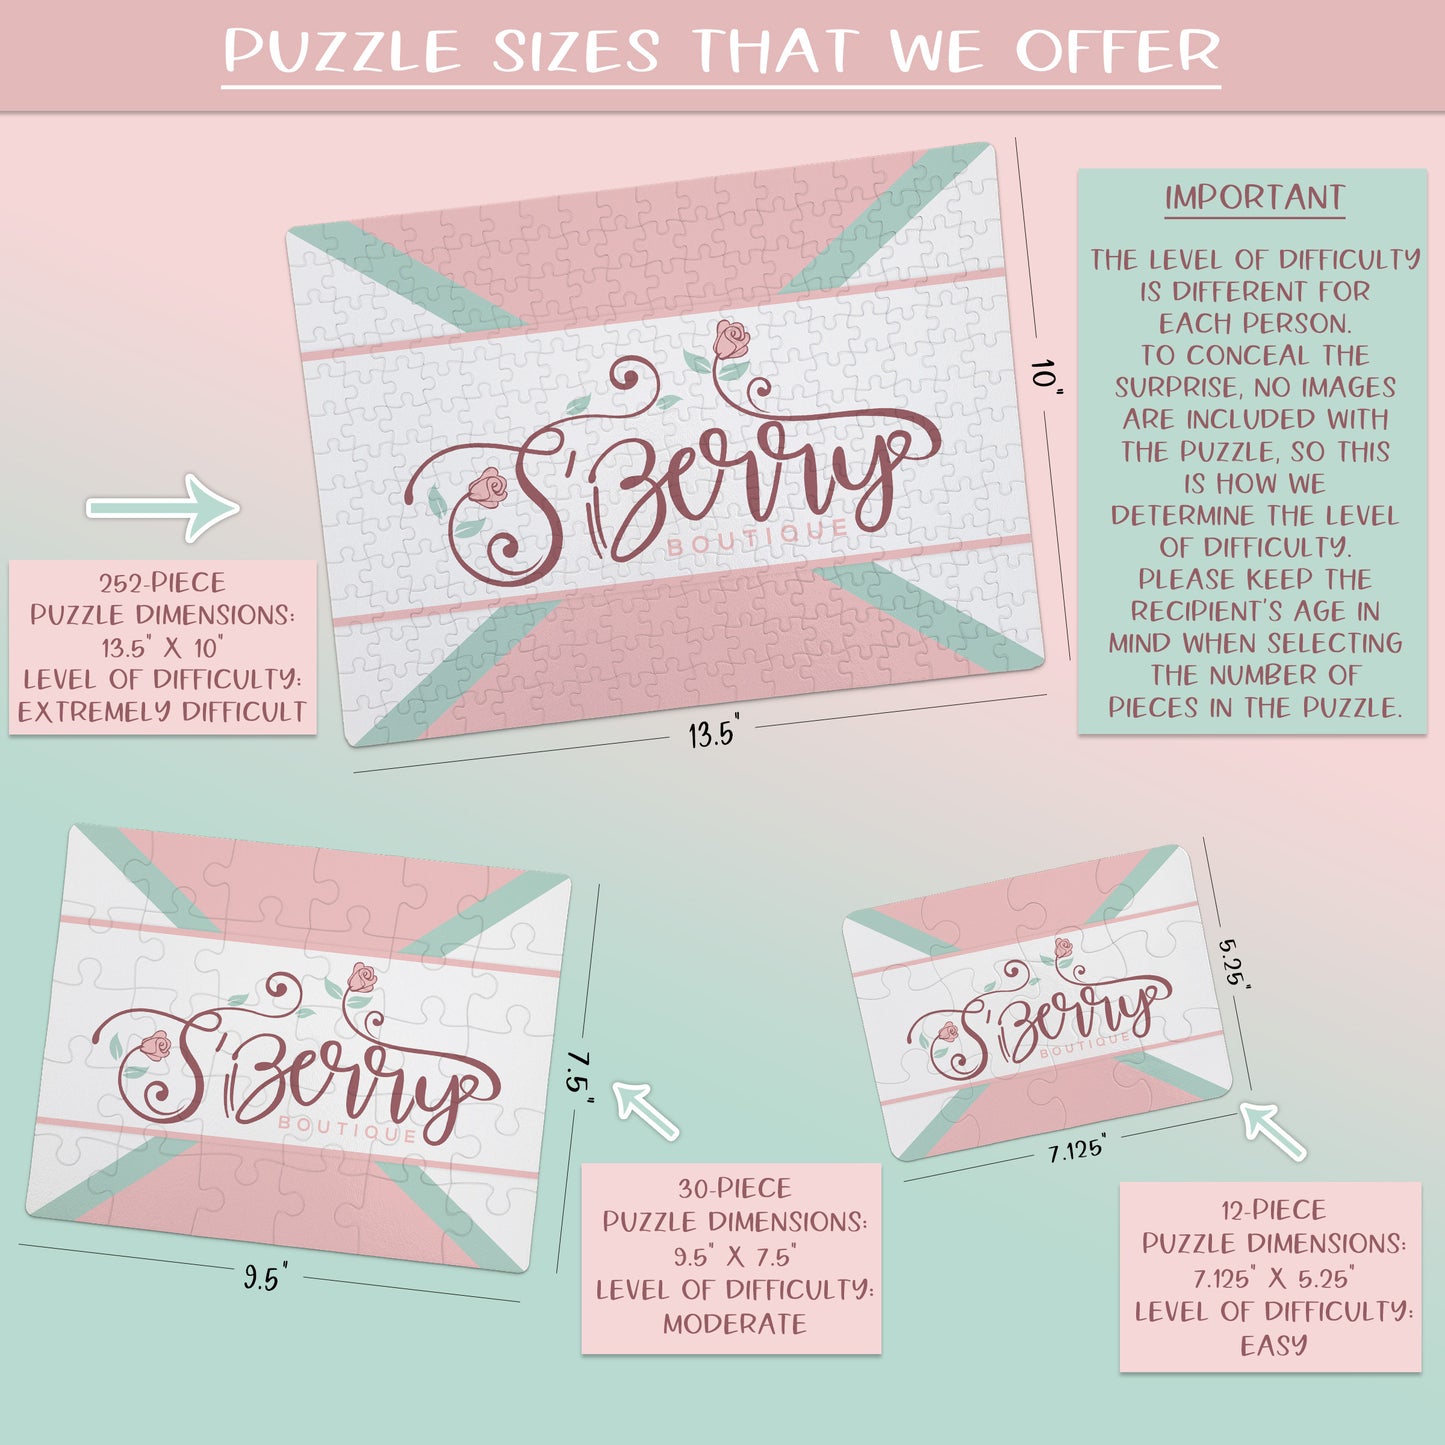 Create Your Own Puzzle - Arrow Design - CYOP0223 | S'Berry Boutique